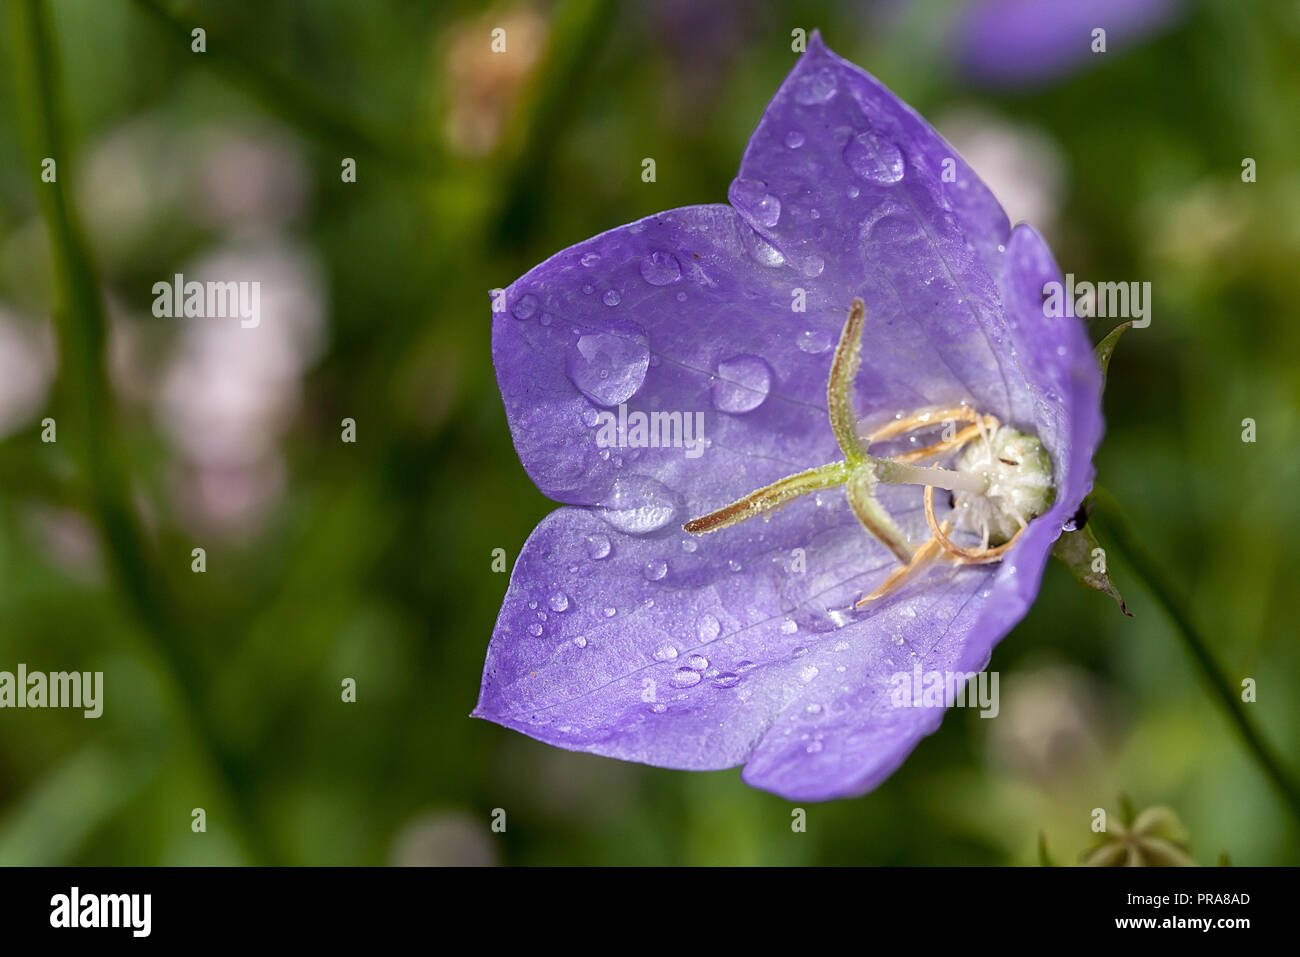 Single Campanula purple flower close up with early morning dew drops in July. Colorful cupped petals surround the stamen head Stock Photo